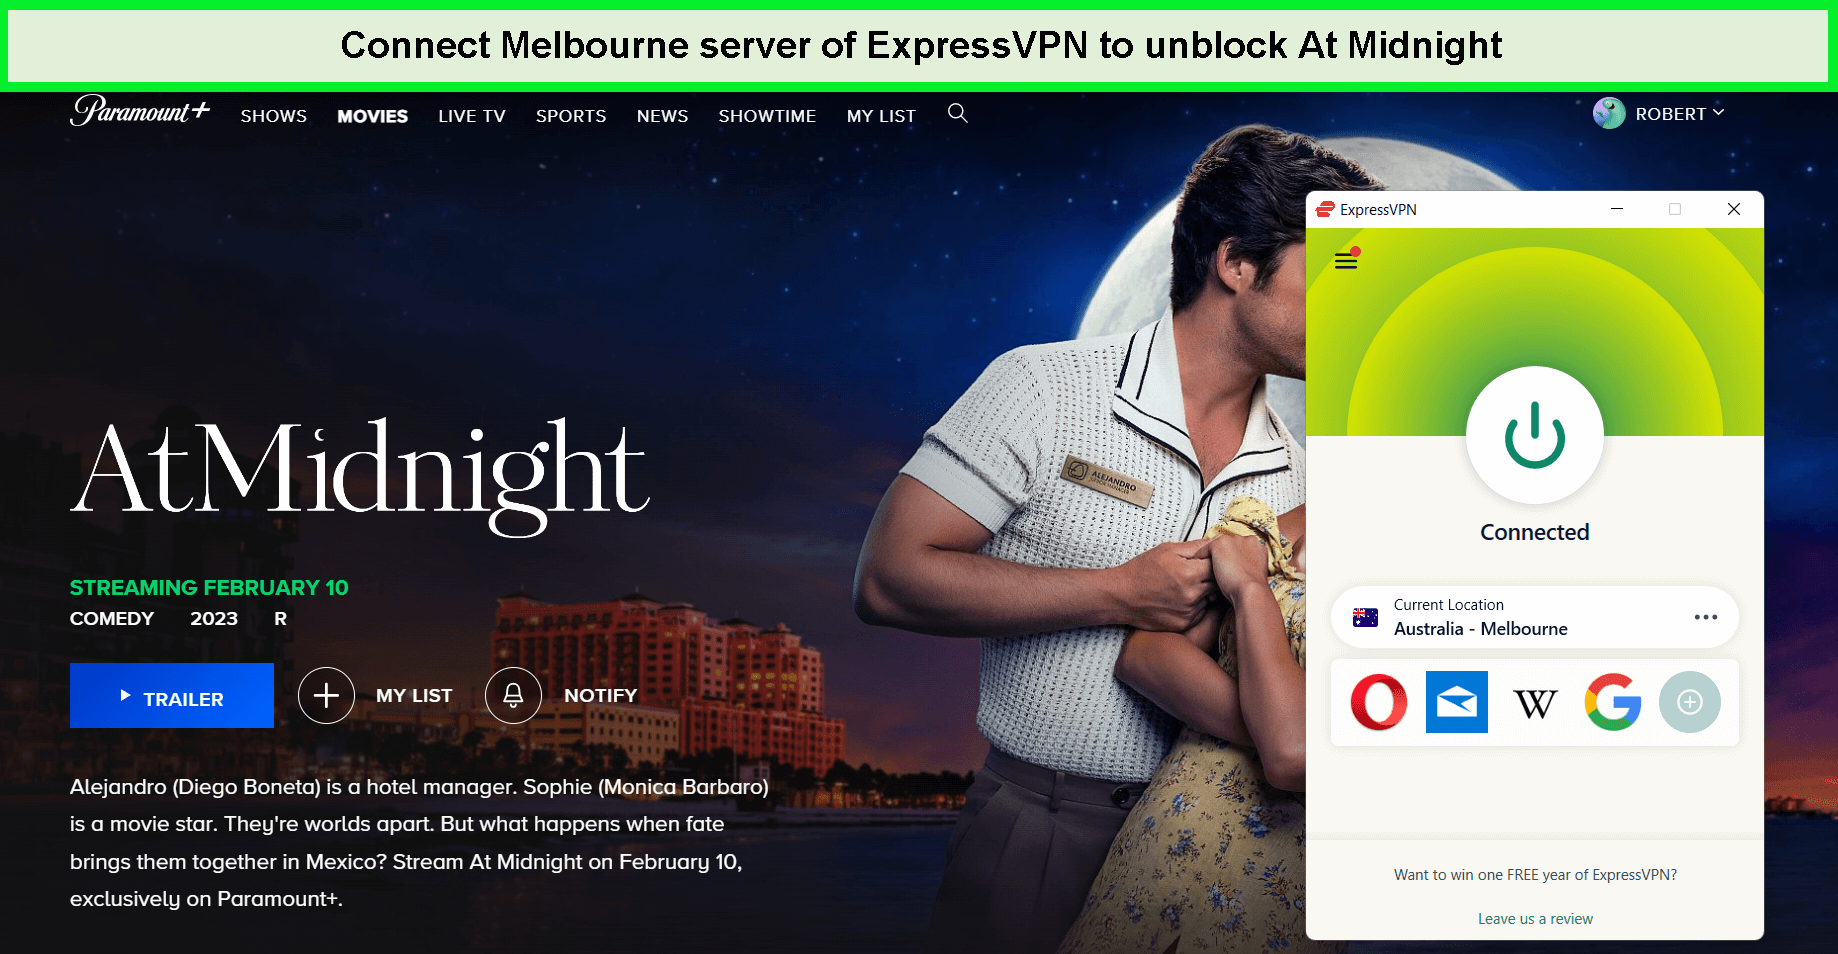 Use the Melbourn server and get instant access to Paramount+ to stream At Midnight outside Australia.